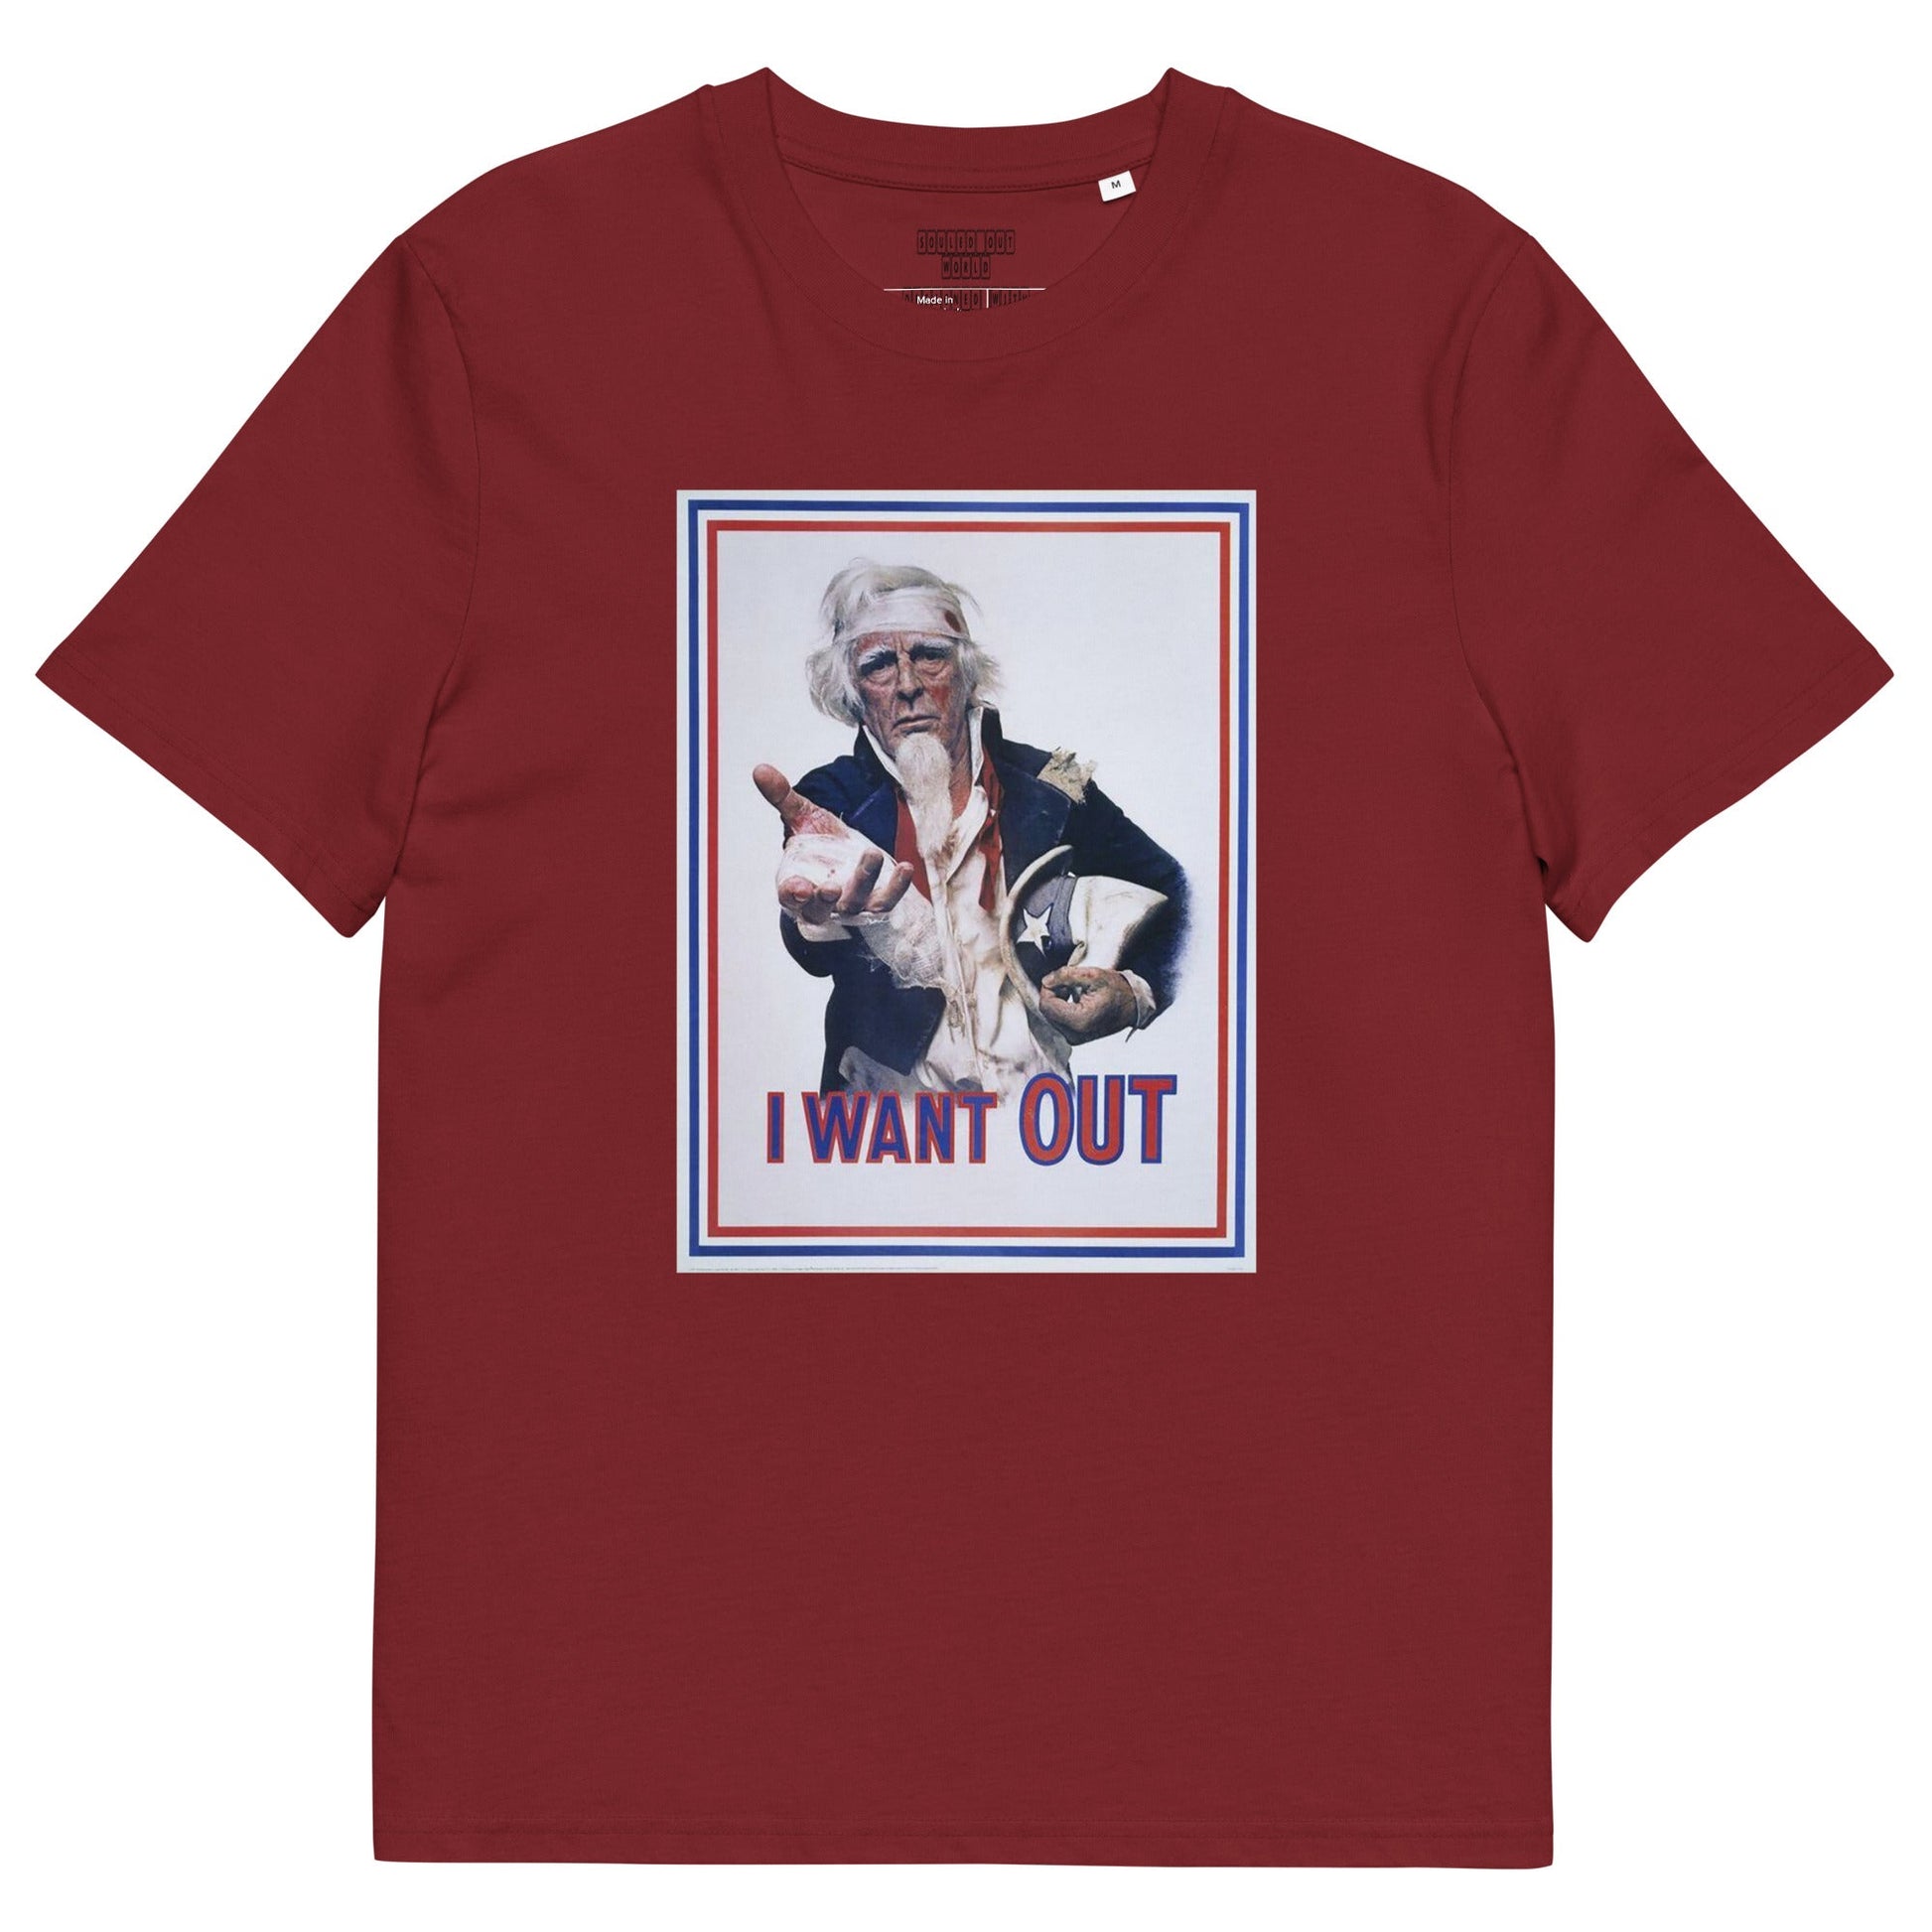 I Want Out - Unisex organic cotton t-shirt - Souled Out World